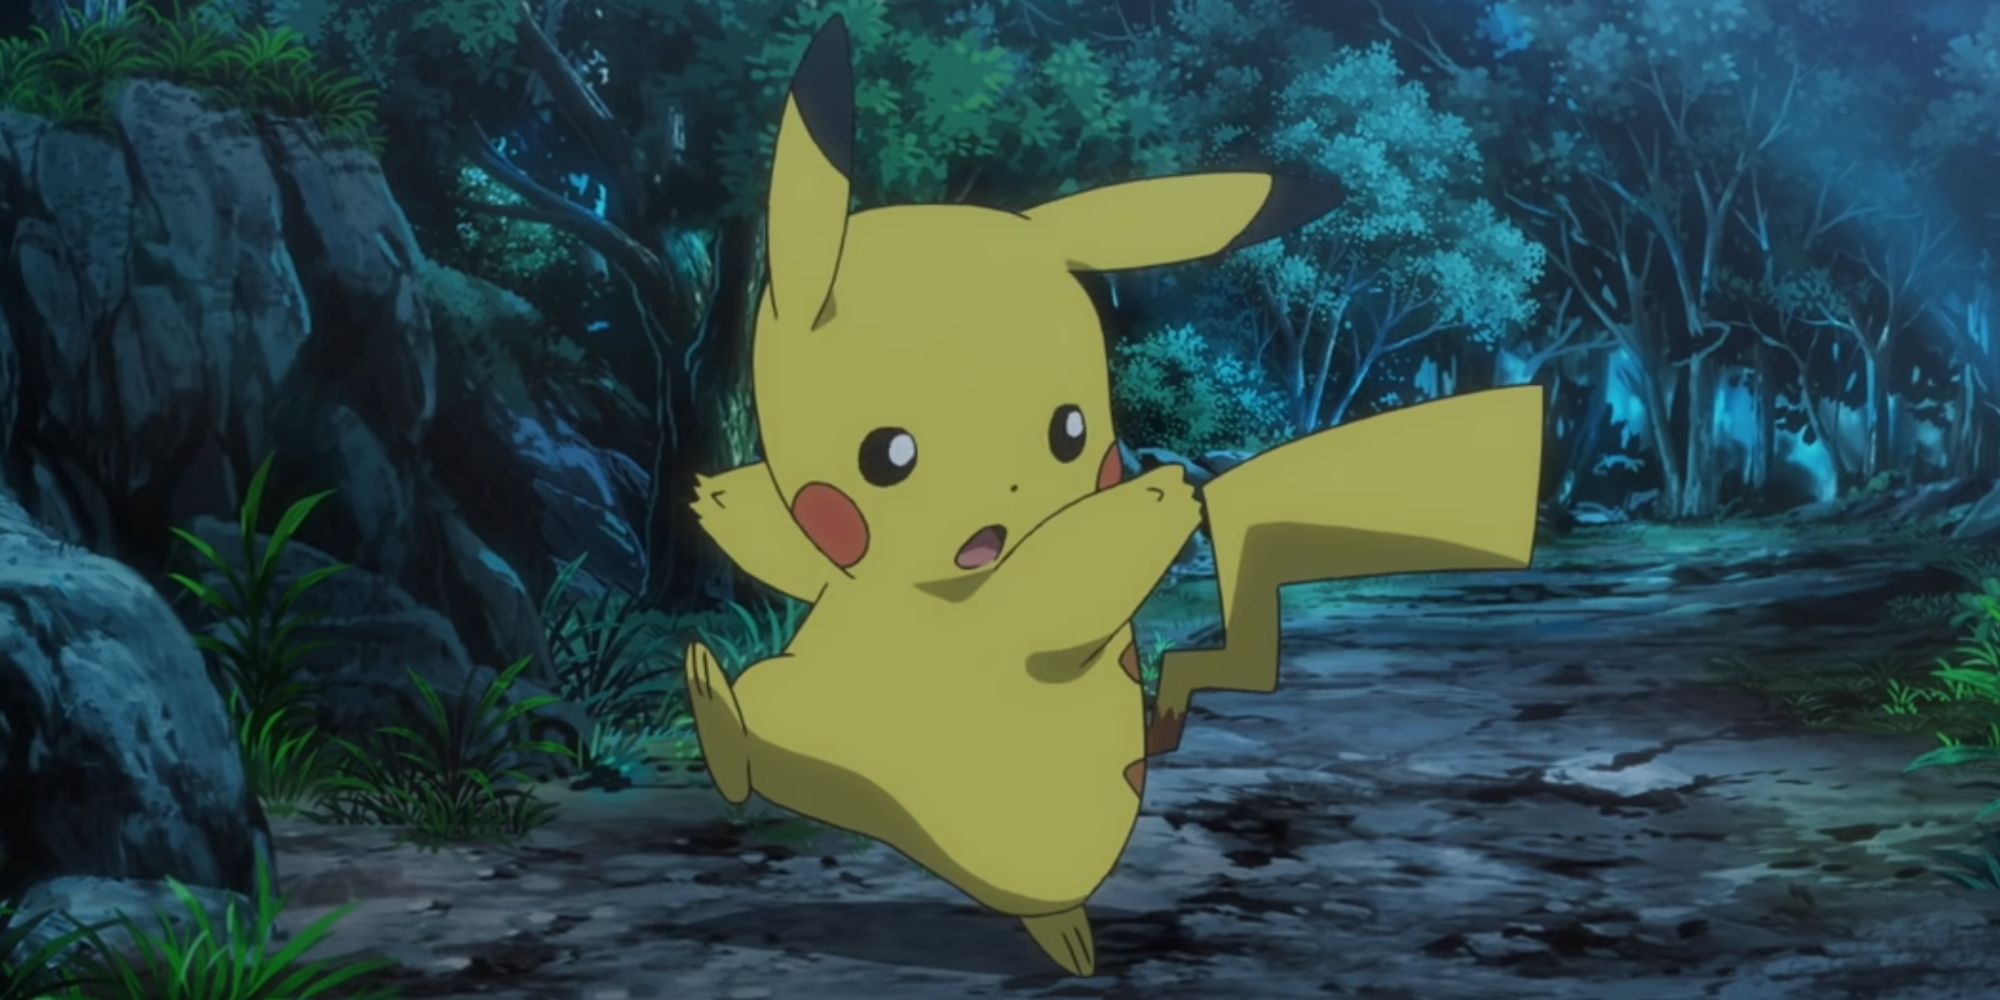 Pokemon anime replaces Pikachu with another Pikachu in a hat | GamesRadar+-demhanvico.com.vn